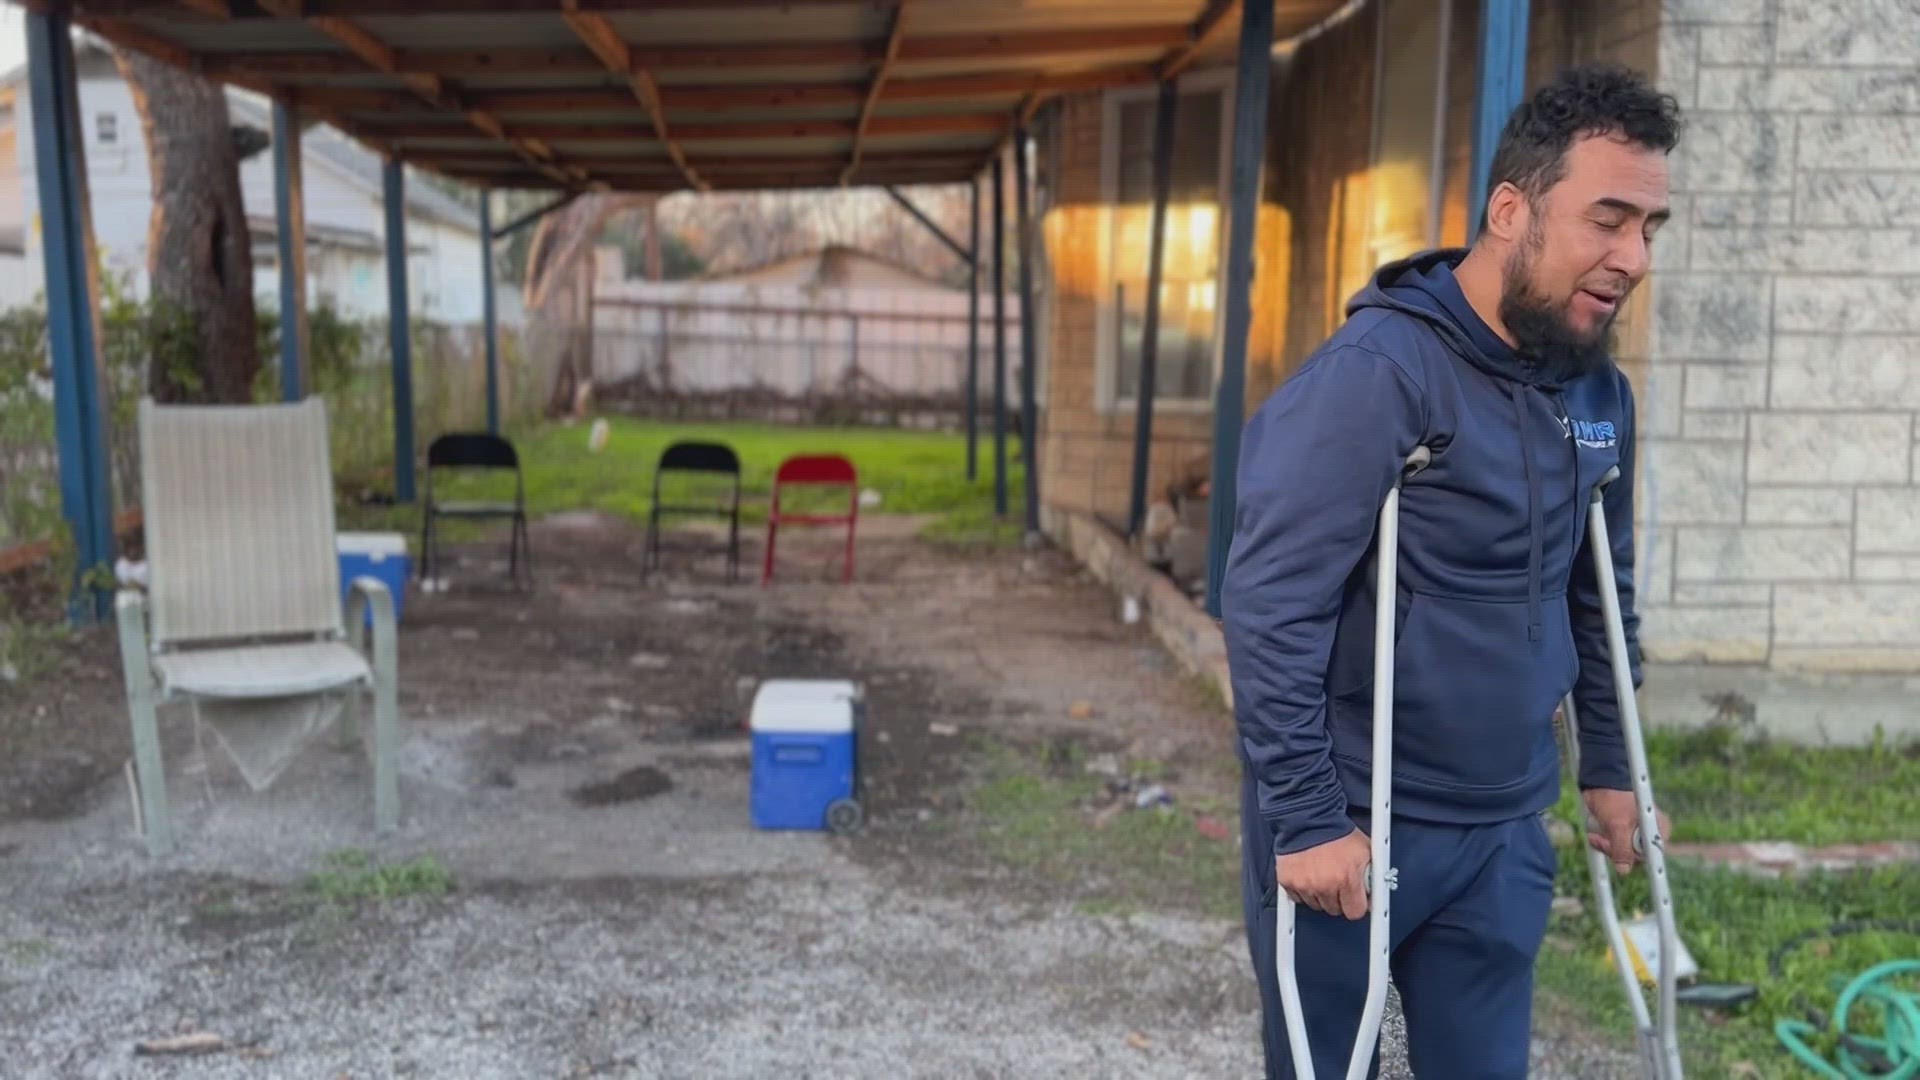 One minute, Federico and his family were gathered around a fire on New Year's Eve. The next, he was hit by a stray bullet, which narrowly missed his niece, he says.